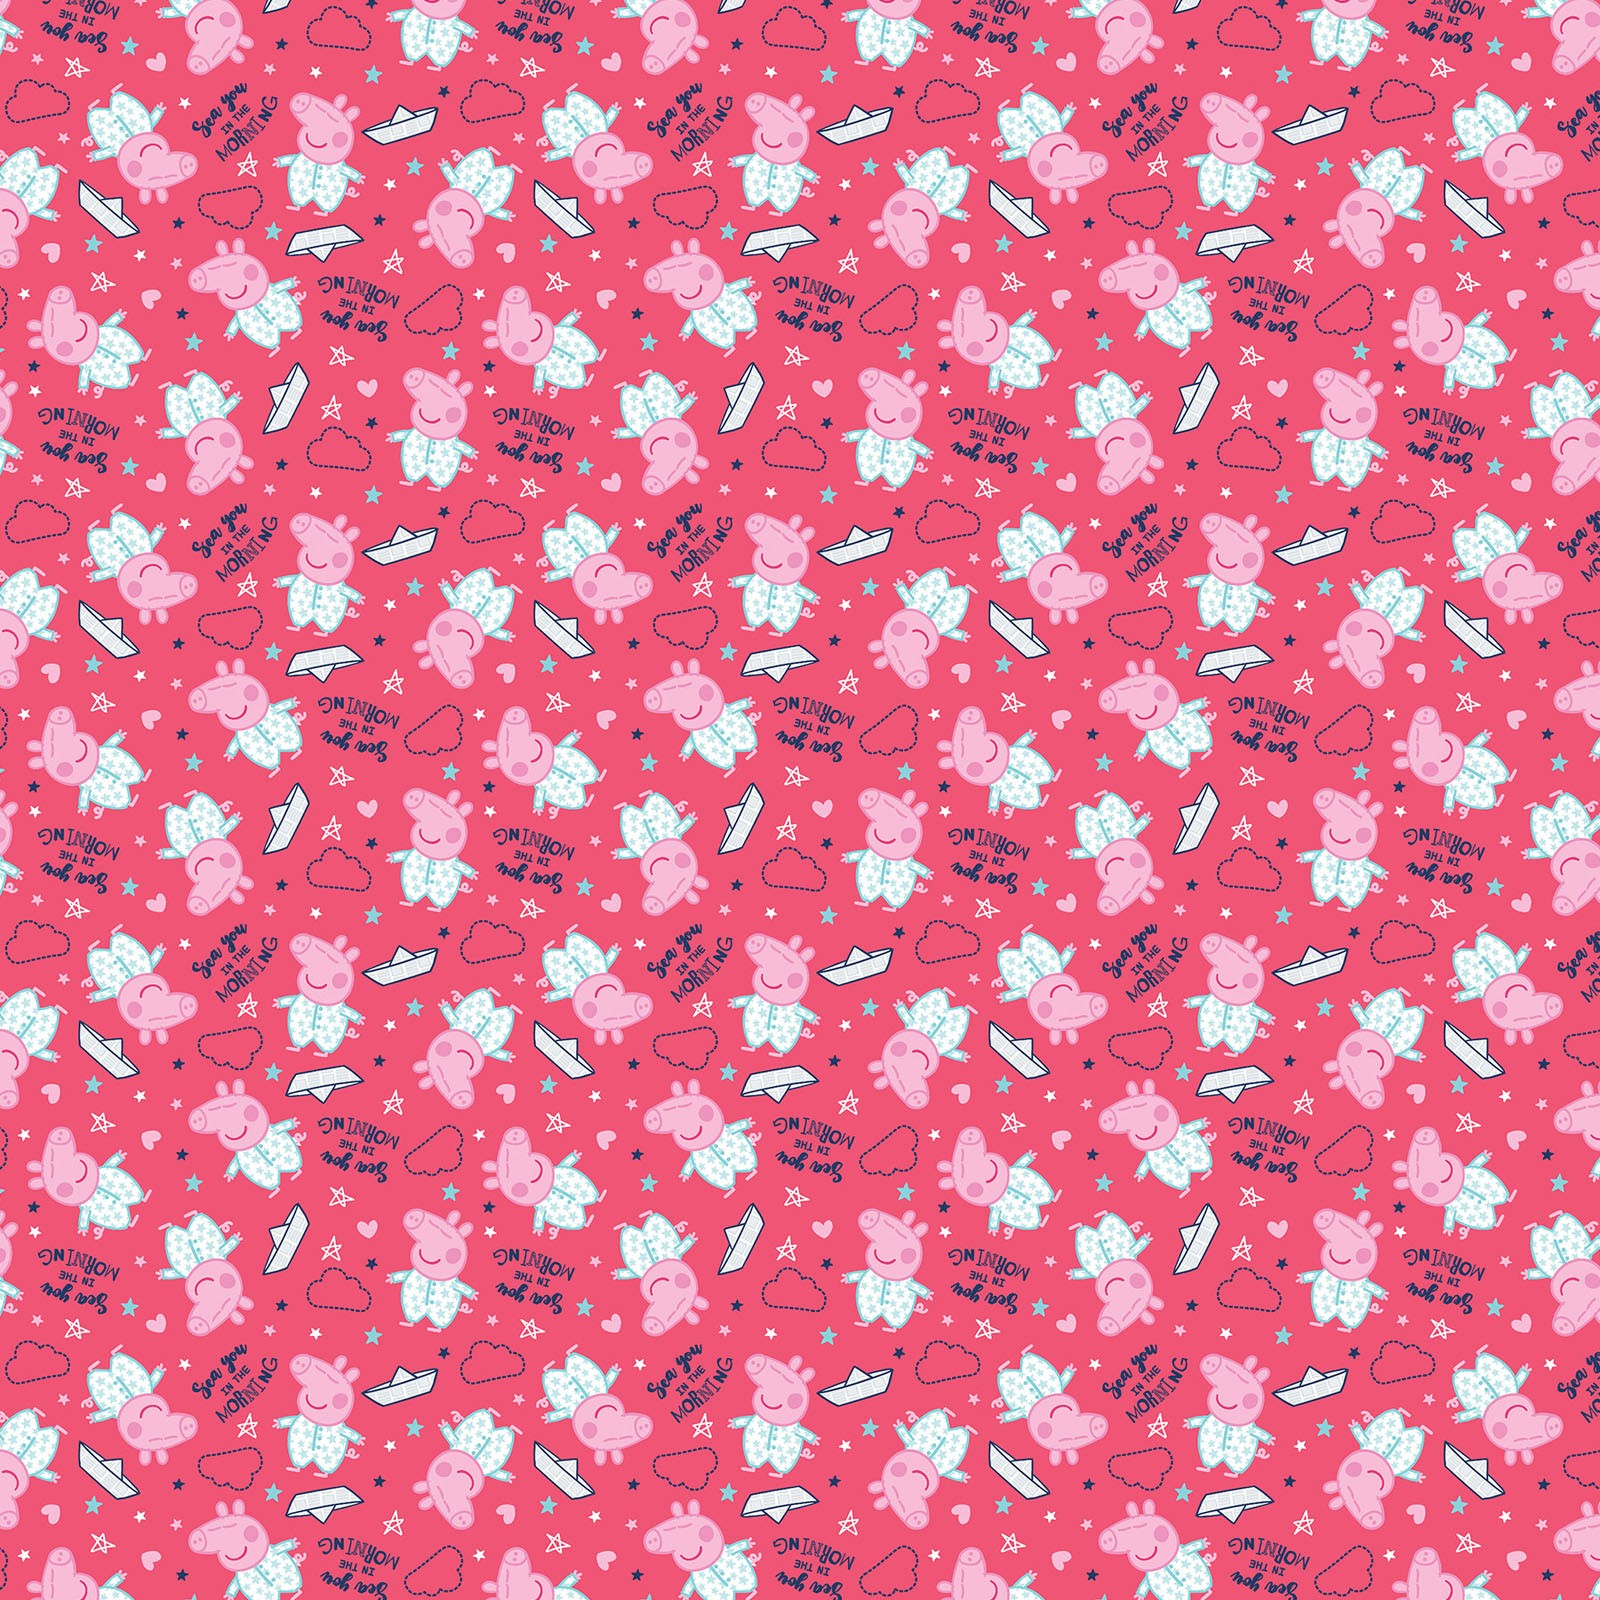 Peppa Pig Sea You in the Morning Fabric